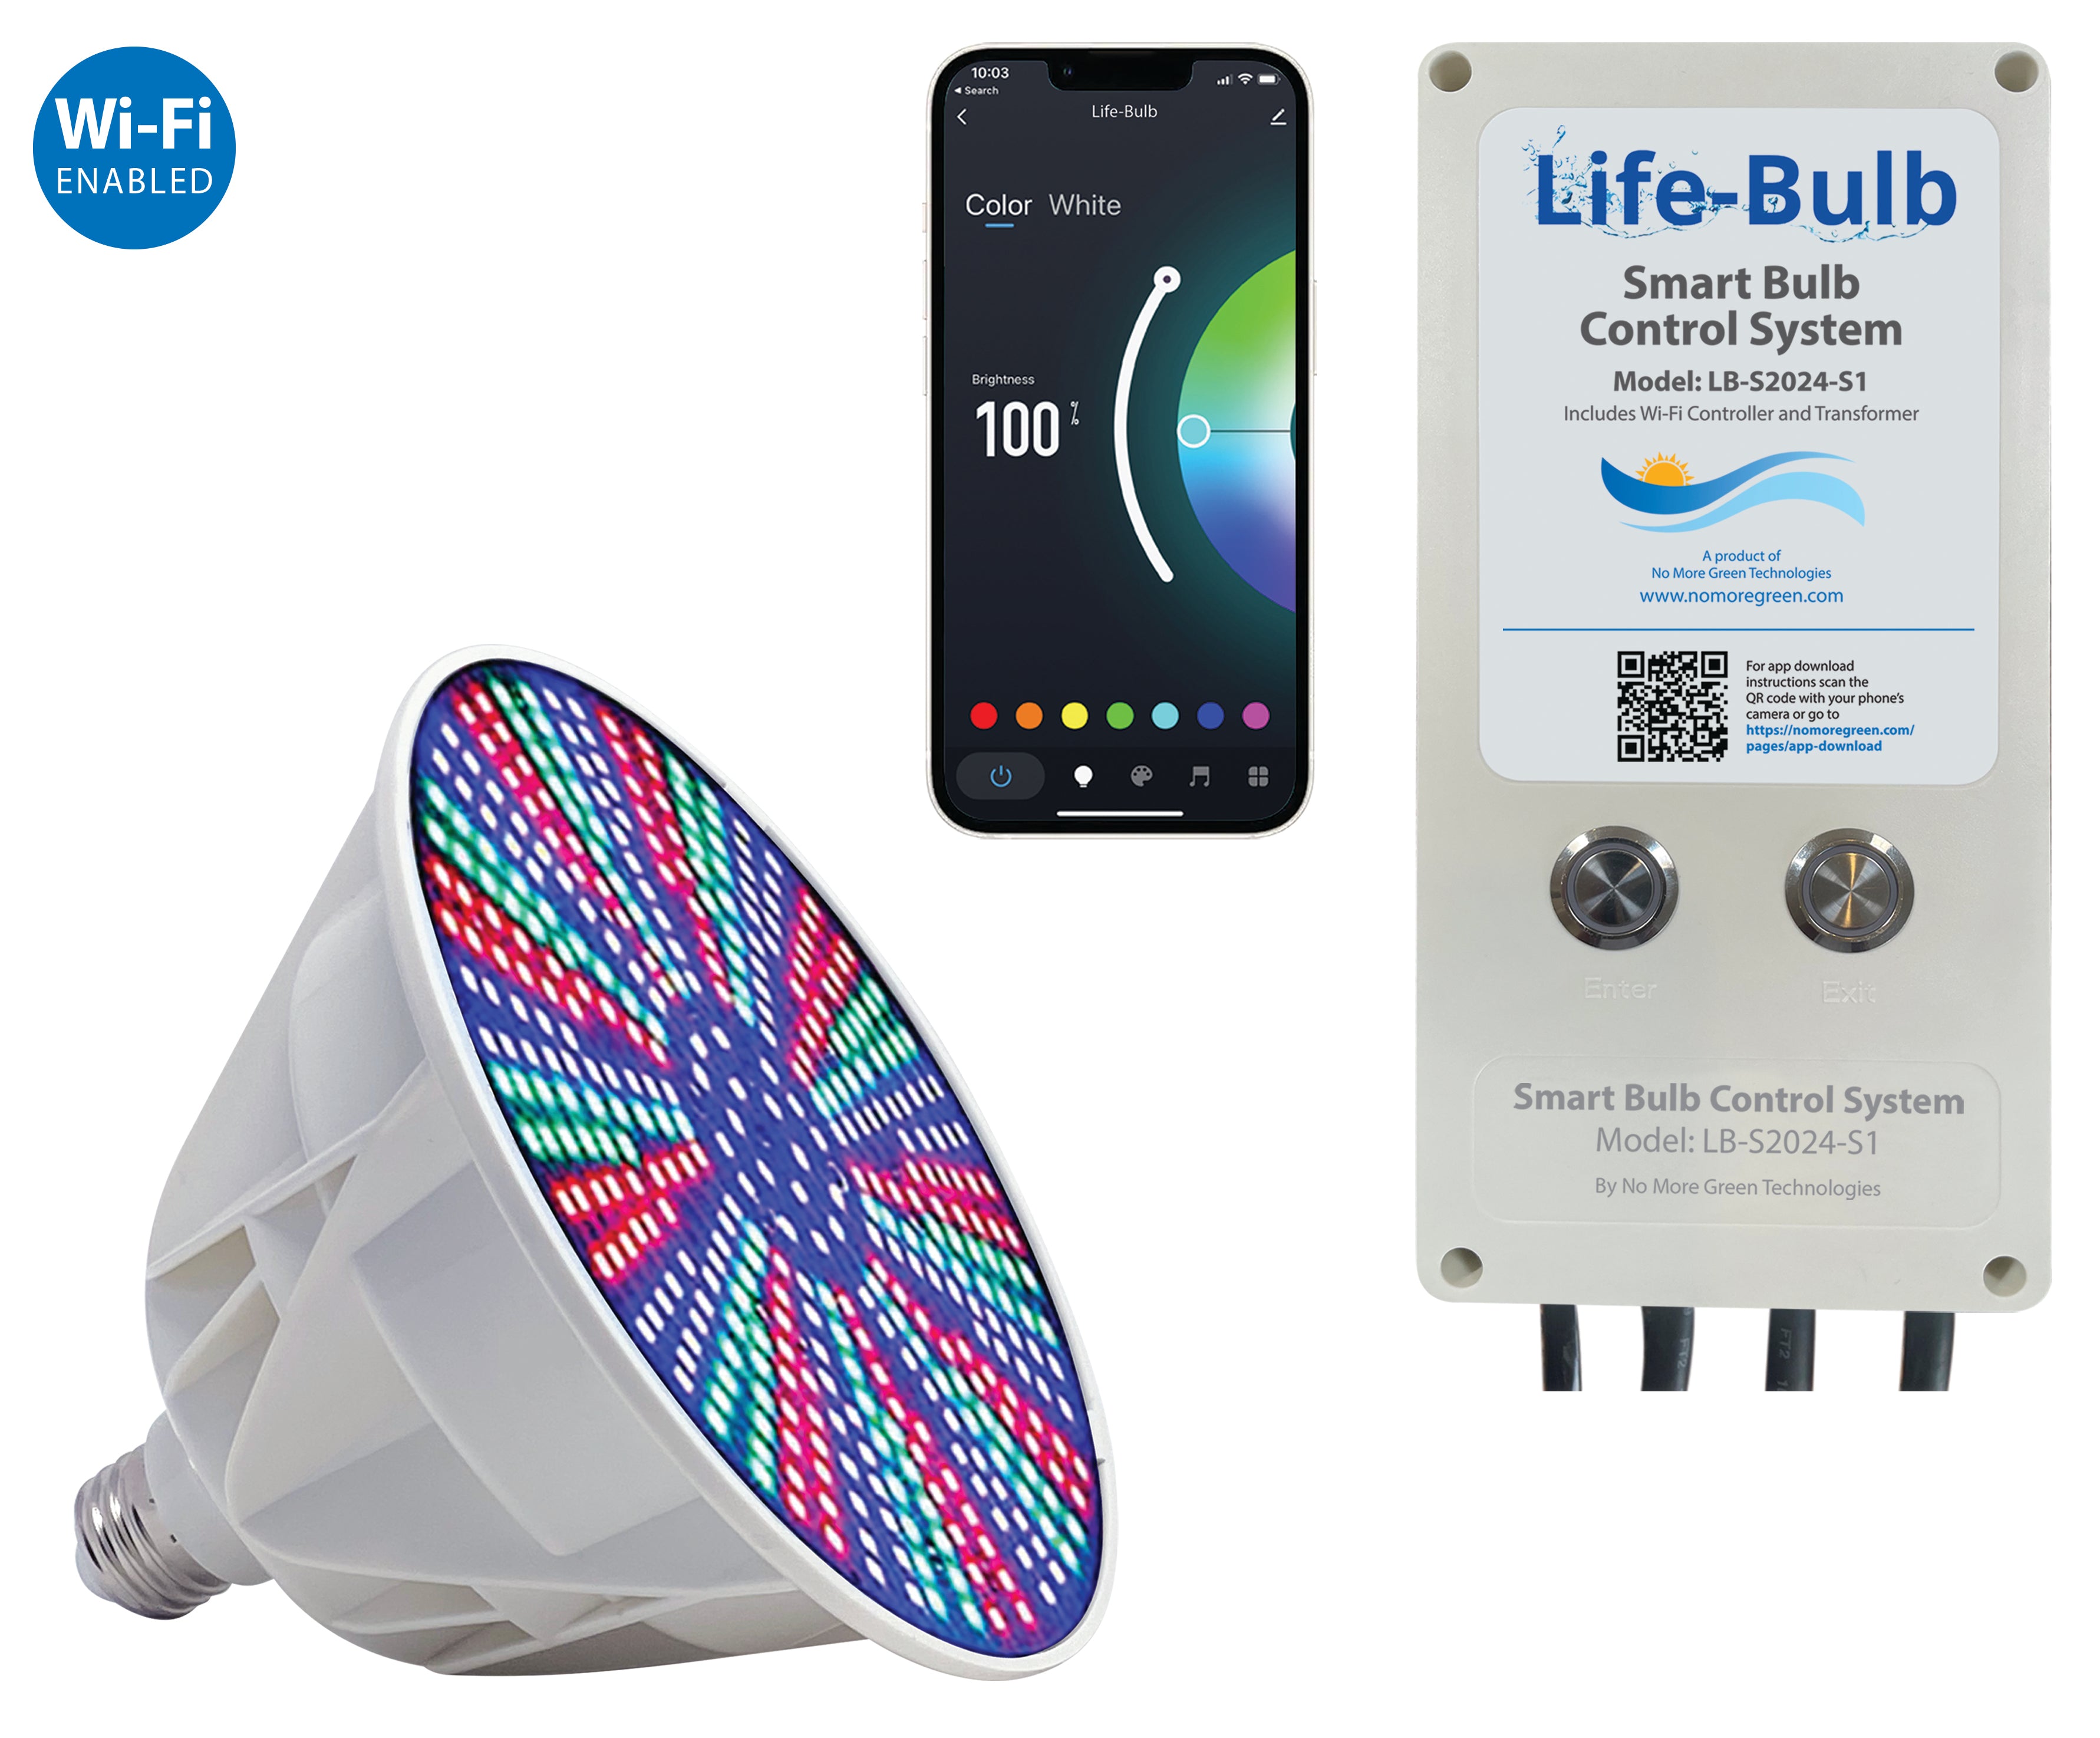 Life-Bulb Smart LED Color Changing Spa Bulb with Smart Bulb Control System | Works with Remote or Smartphone app - iOS or Android | Lifetime Replacement Warranty